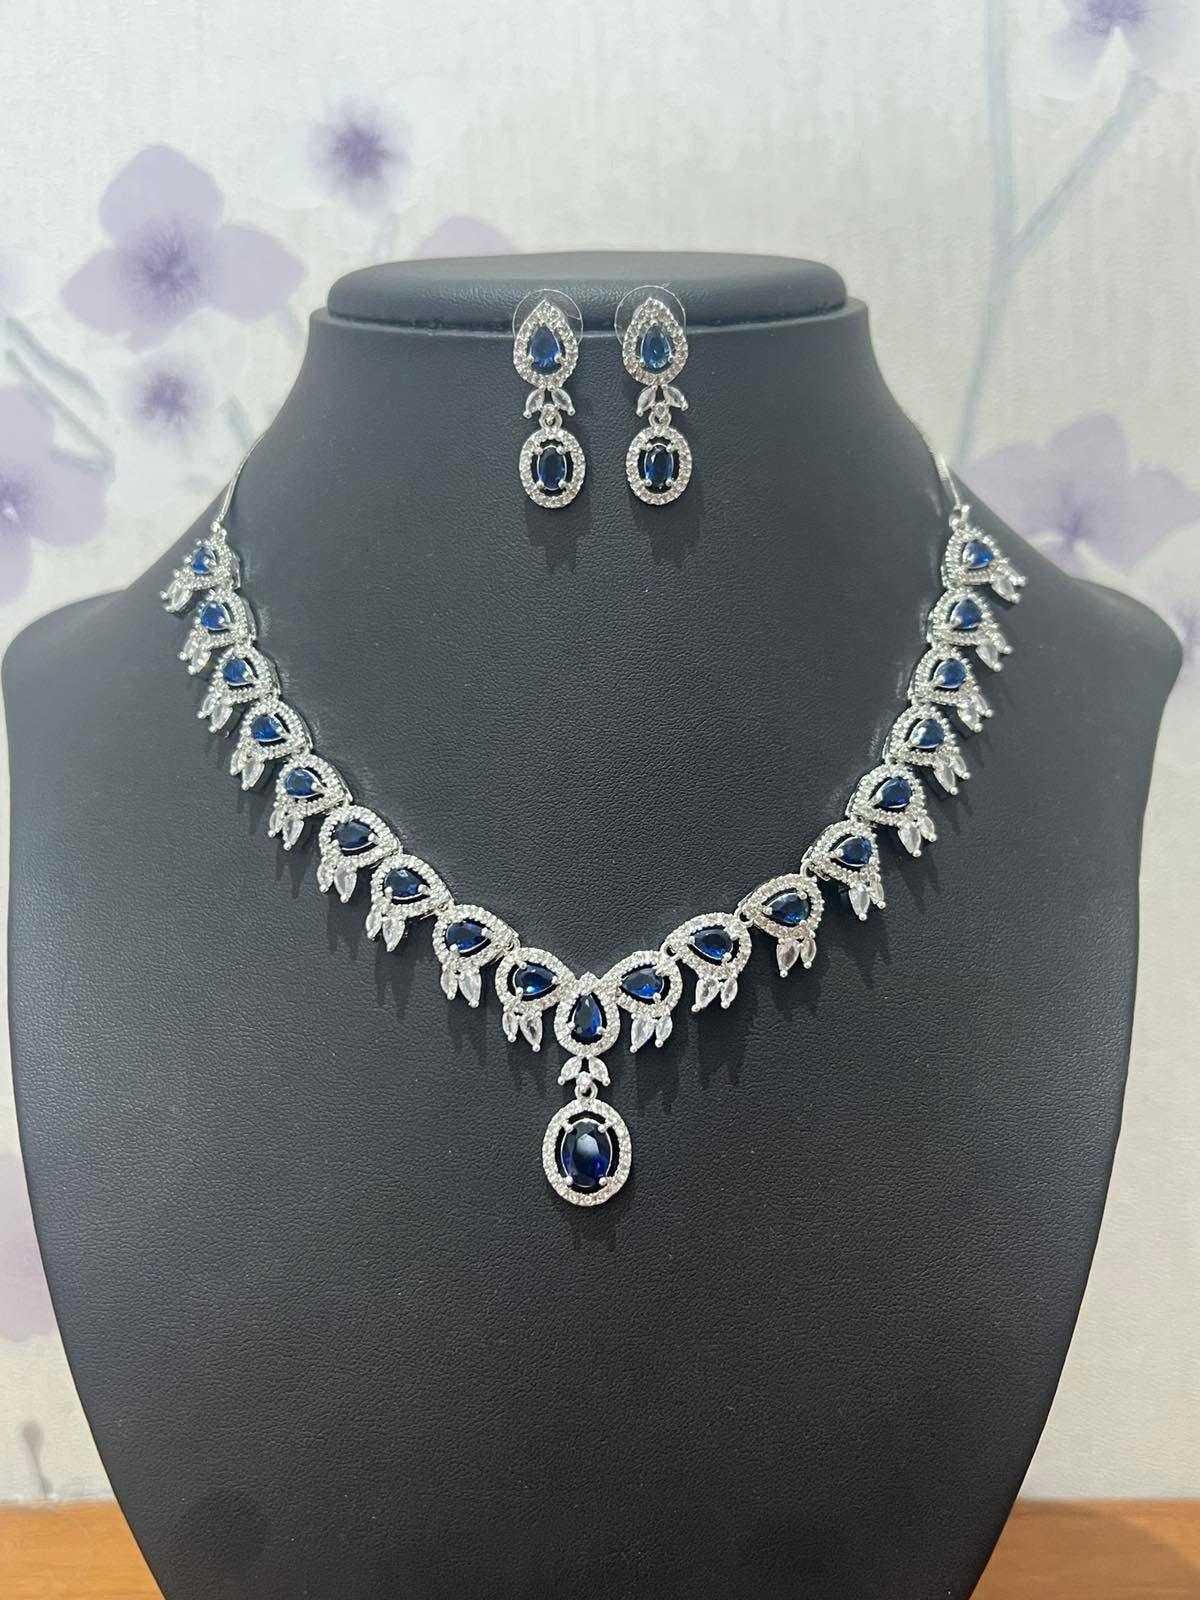 American Diamond Necklace with Royal Blue Stone - Boutique Nepal